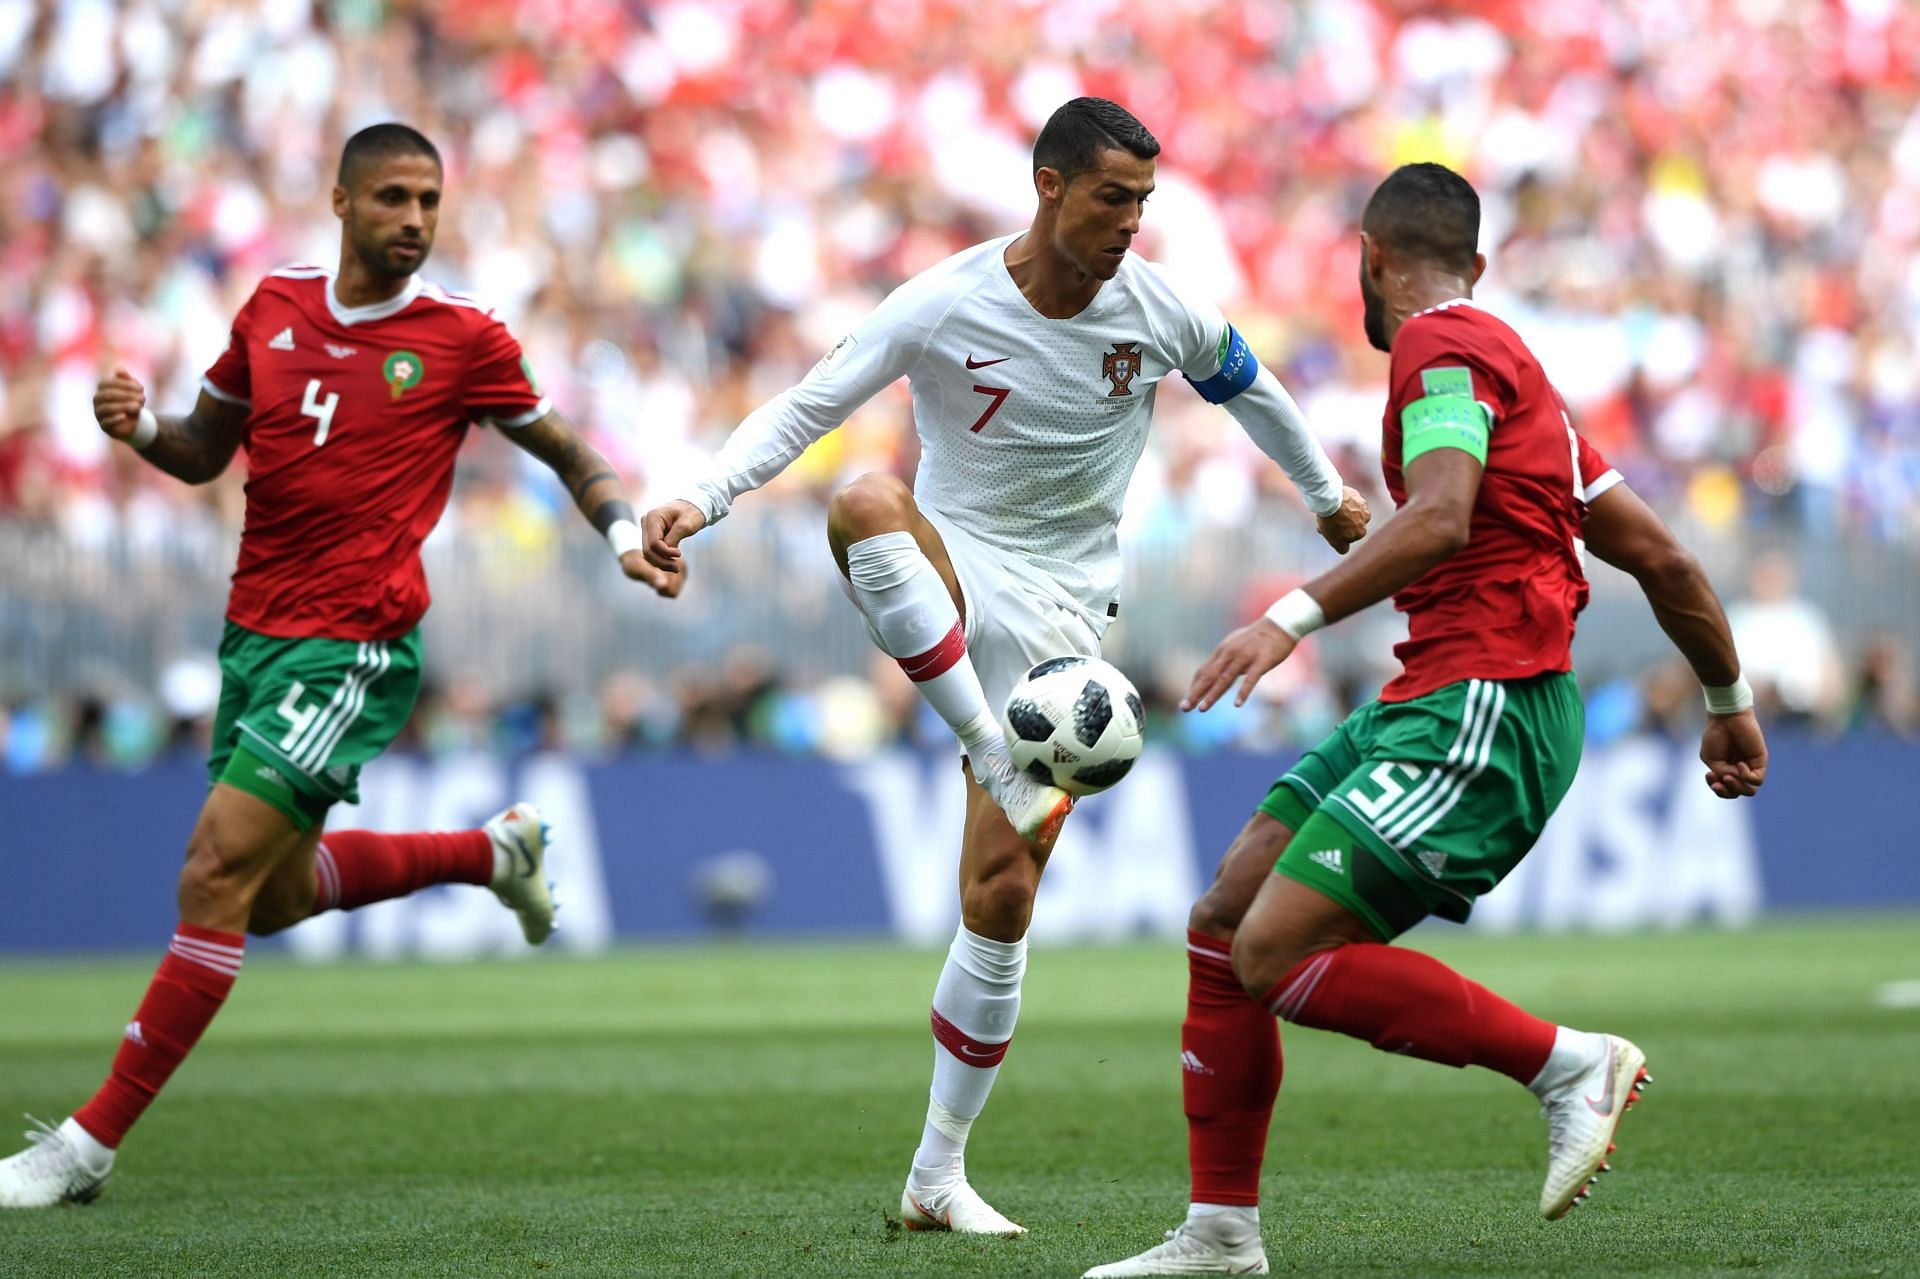 Morocco vs Portugal HeadtoHead stats and numbers you need to know